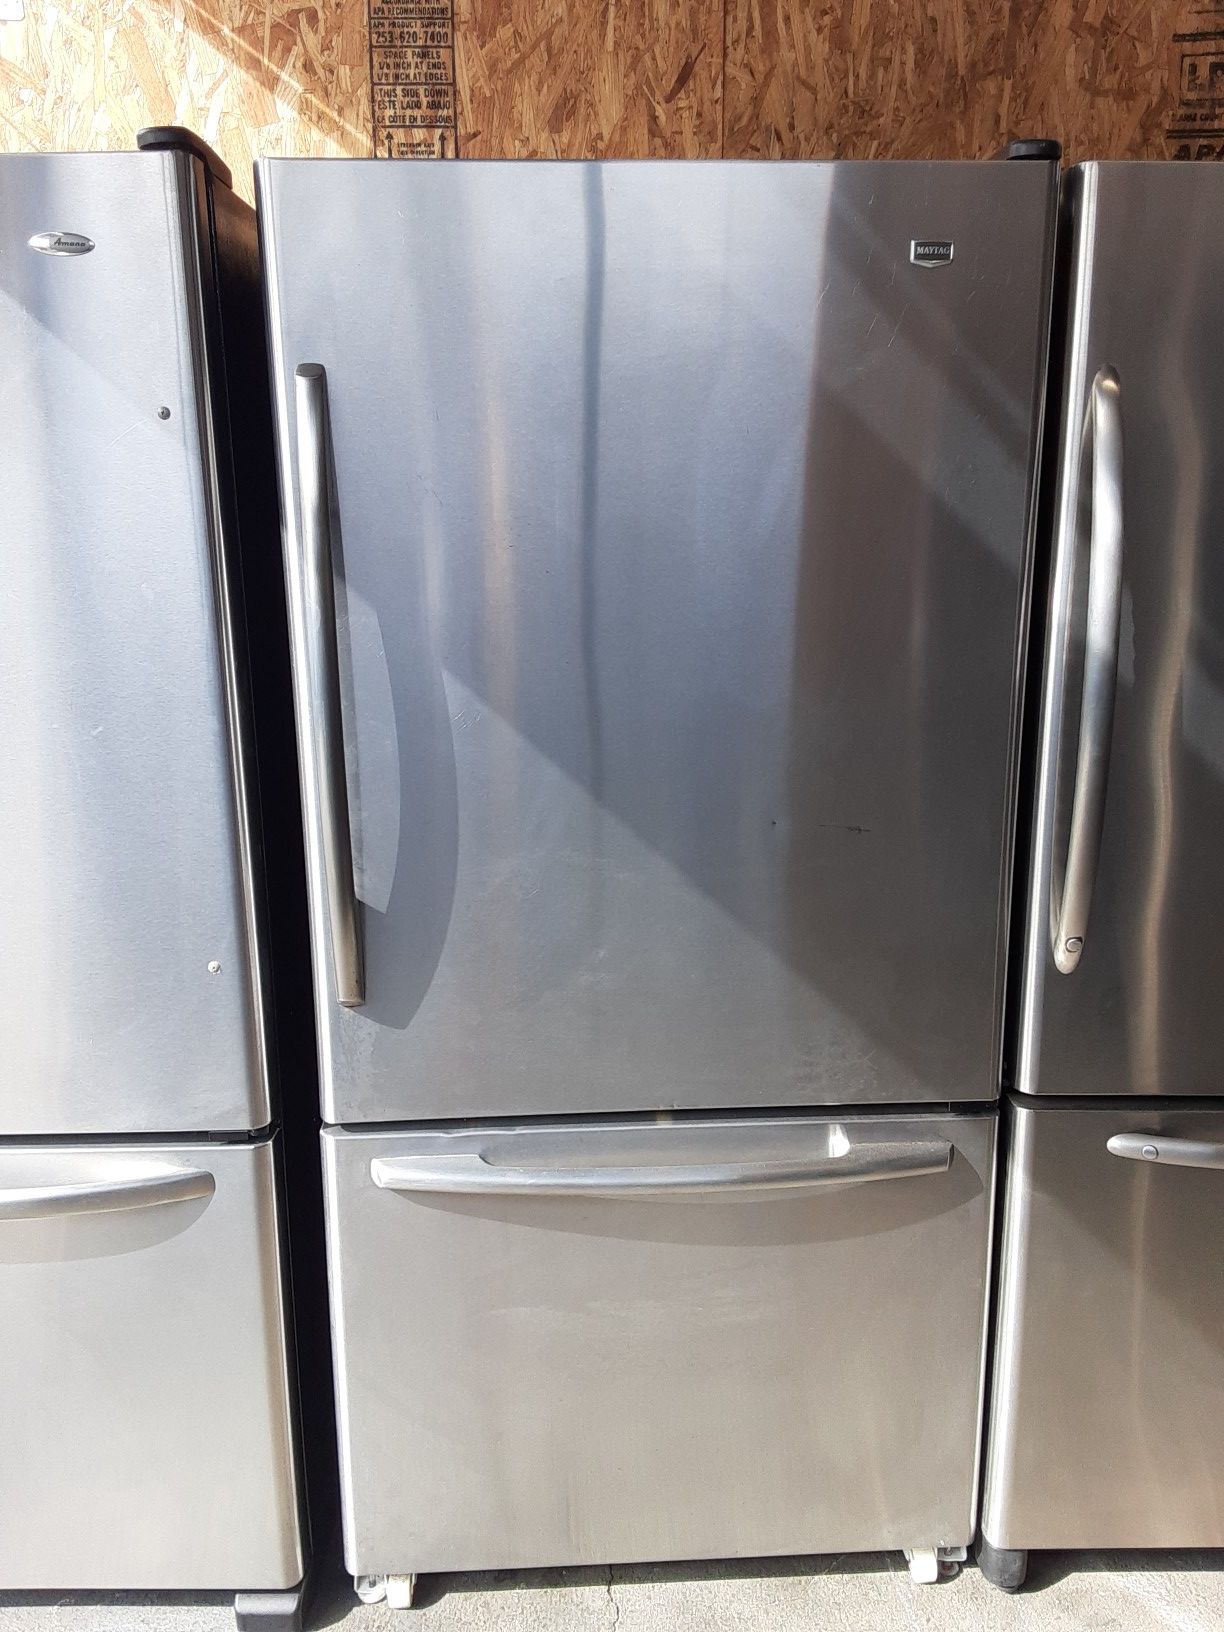 $399 Maytag stainless bottom freezer fridge measures 33 wide includes delivery in the San Fernando Valley a warranty and installation